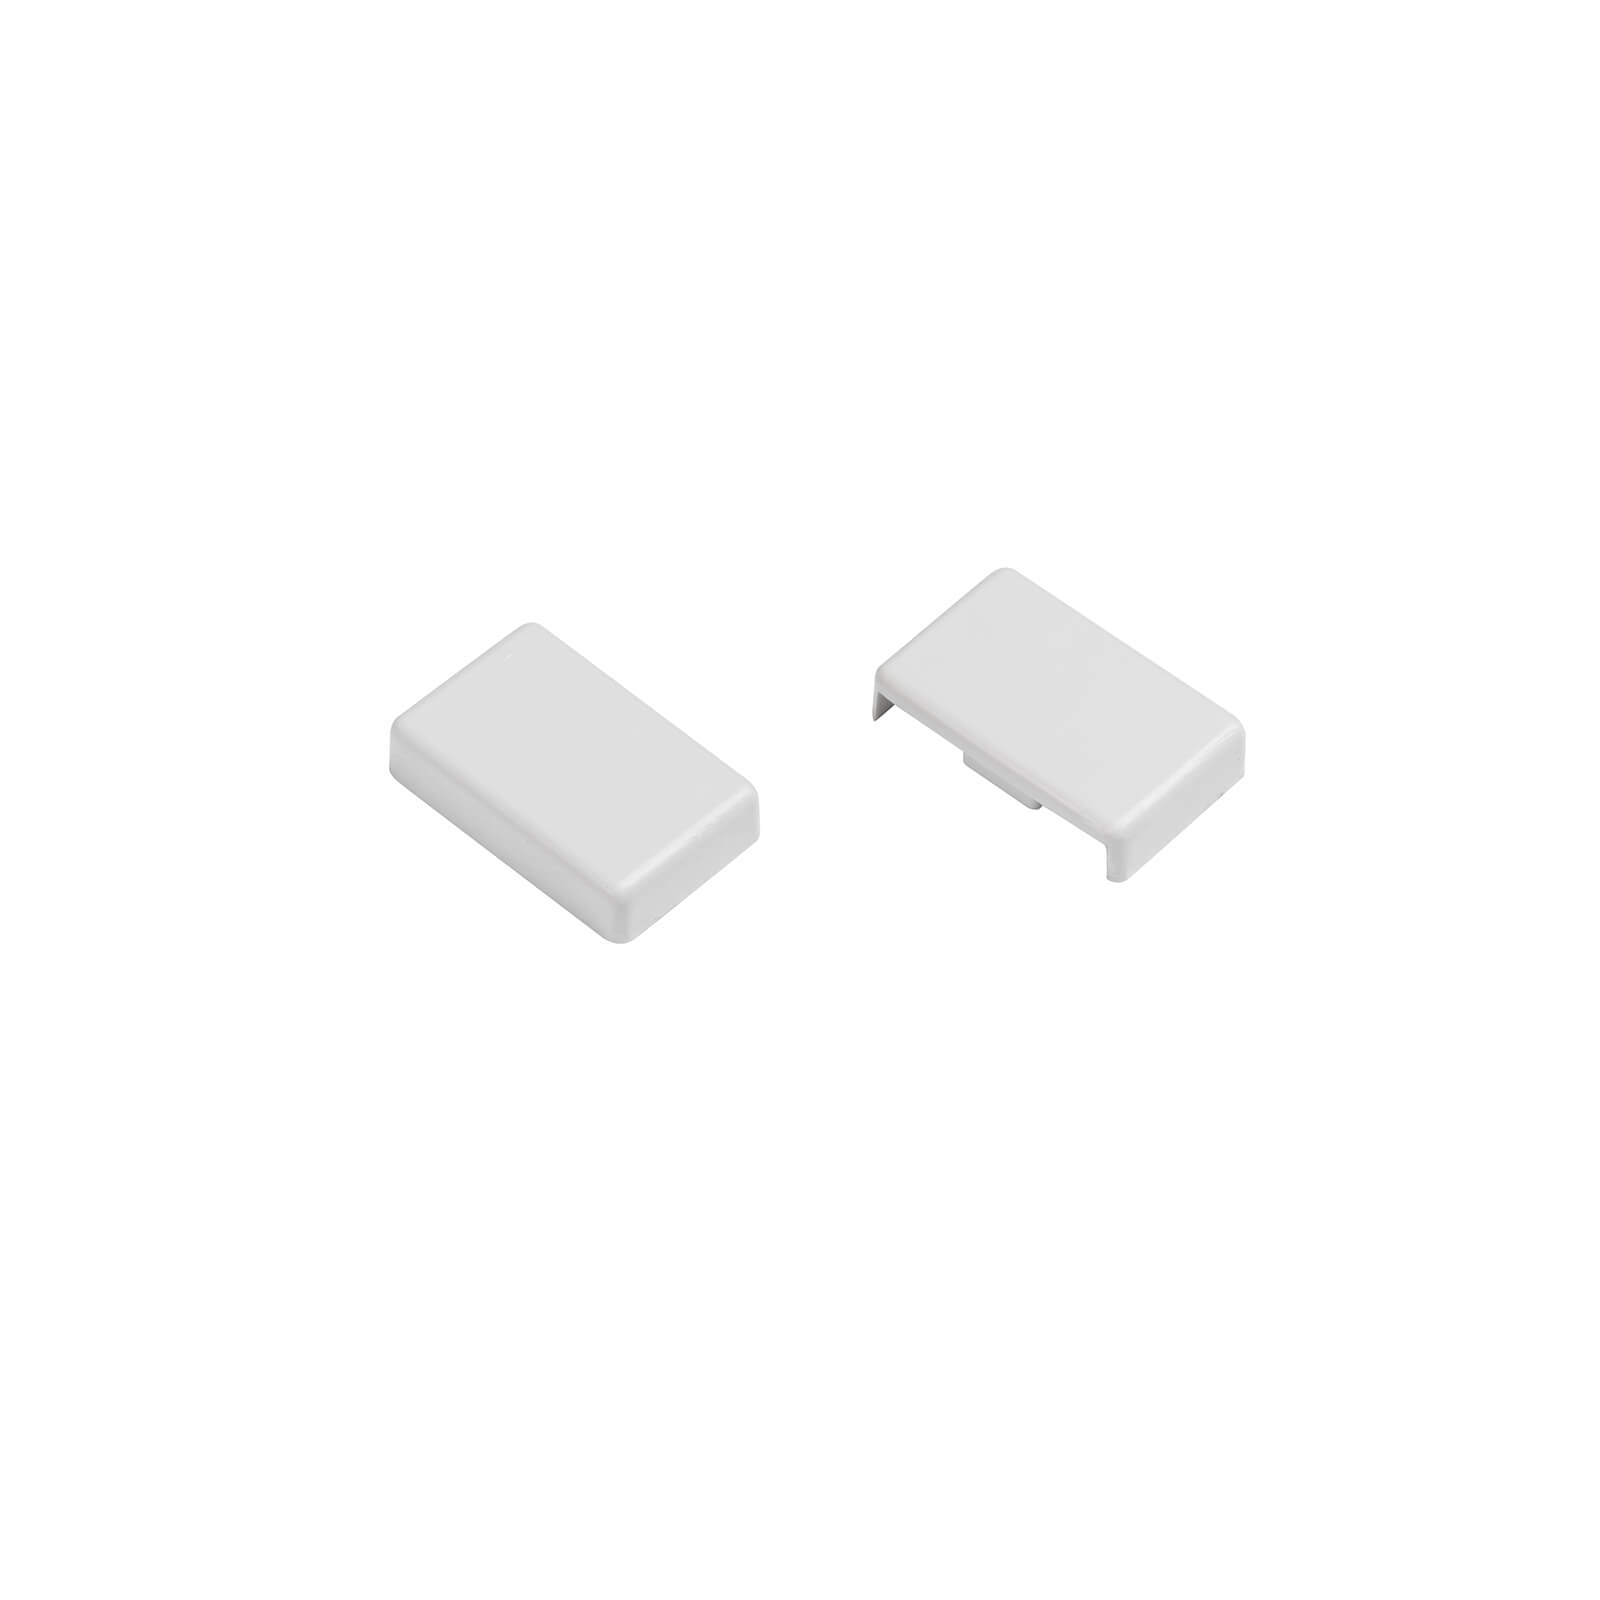 Photo of D-line 25x16mm Trunking Clip-on End Cap 2 Pack - White